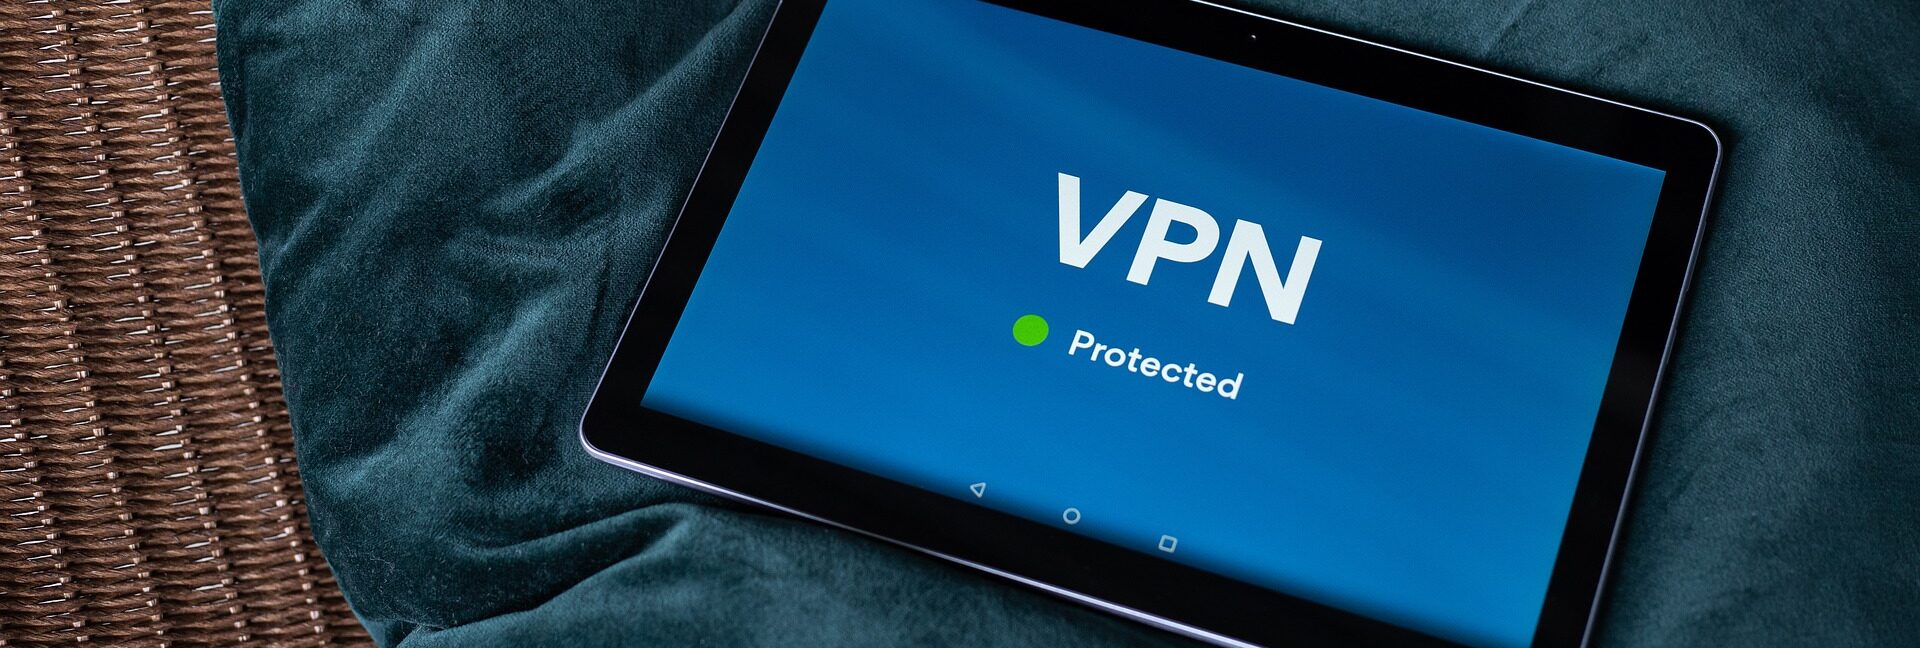 VPN Supports iOS, Android, Pc & Mac